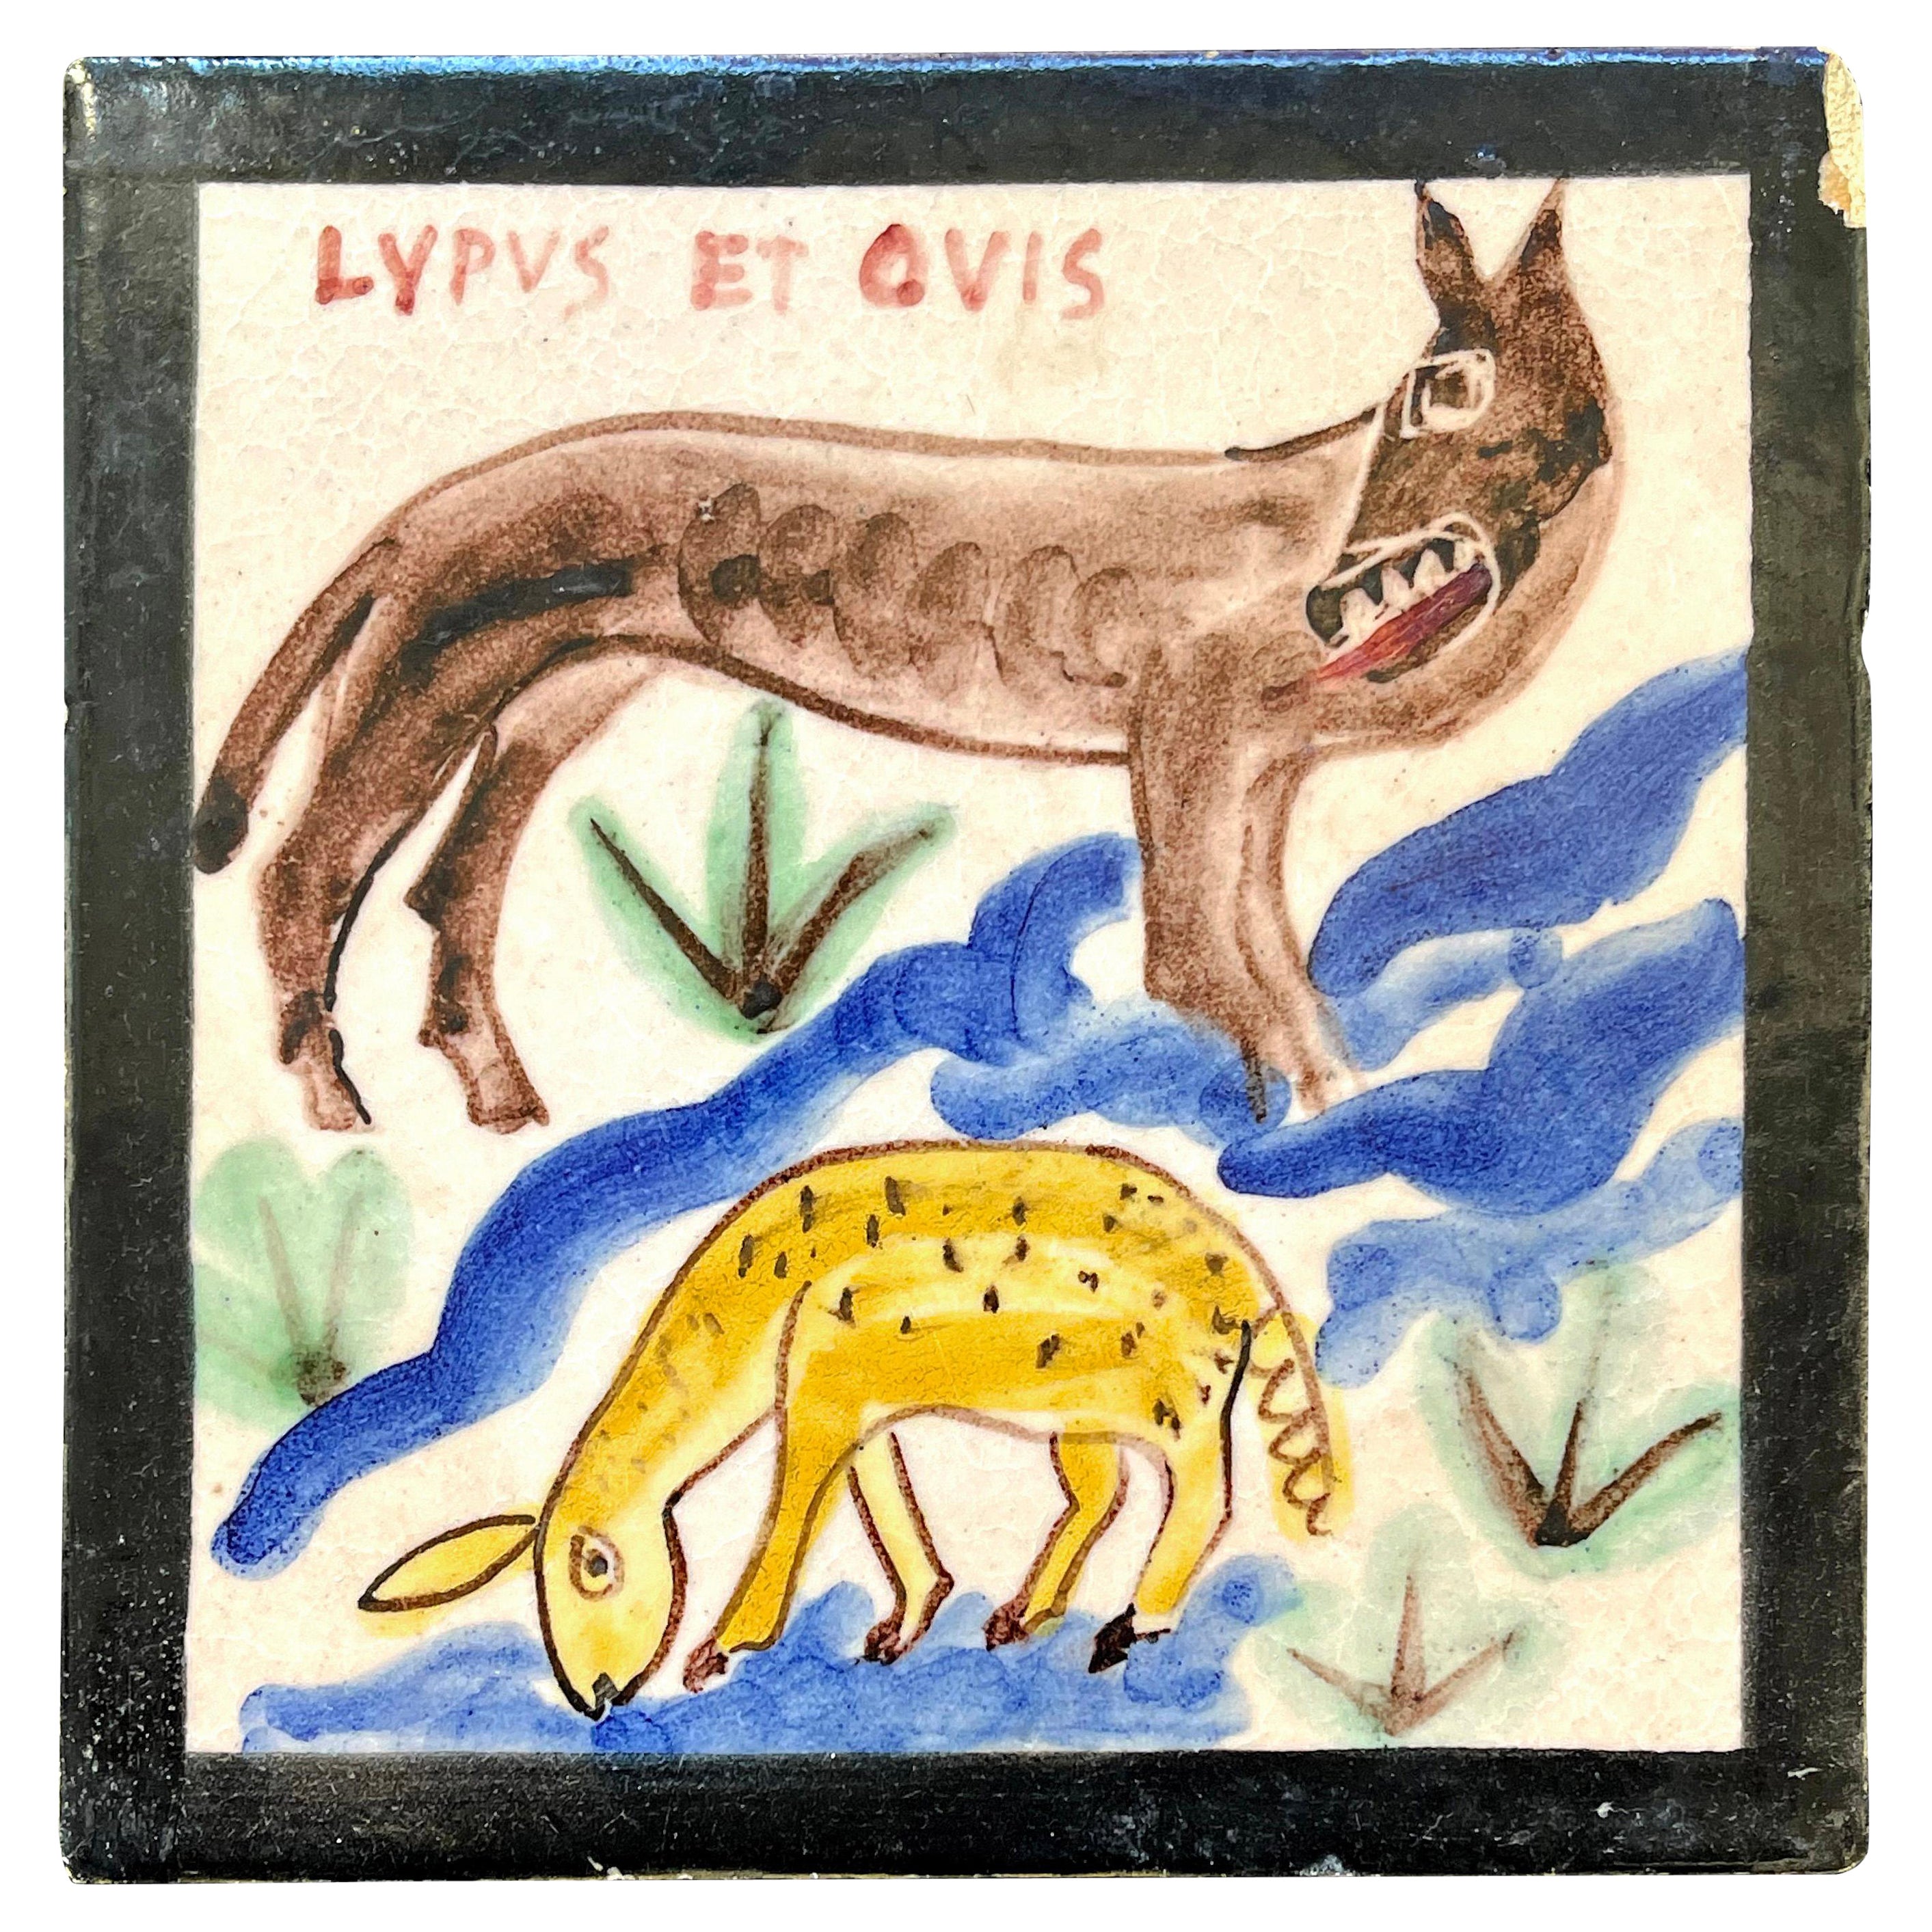 "Wolf and Sheep," Unique, Whimsical Art Deco Tile by I.C.S., Possibly Gambone